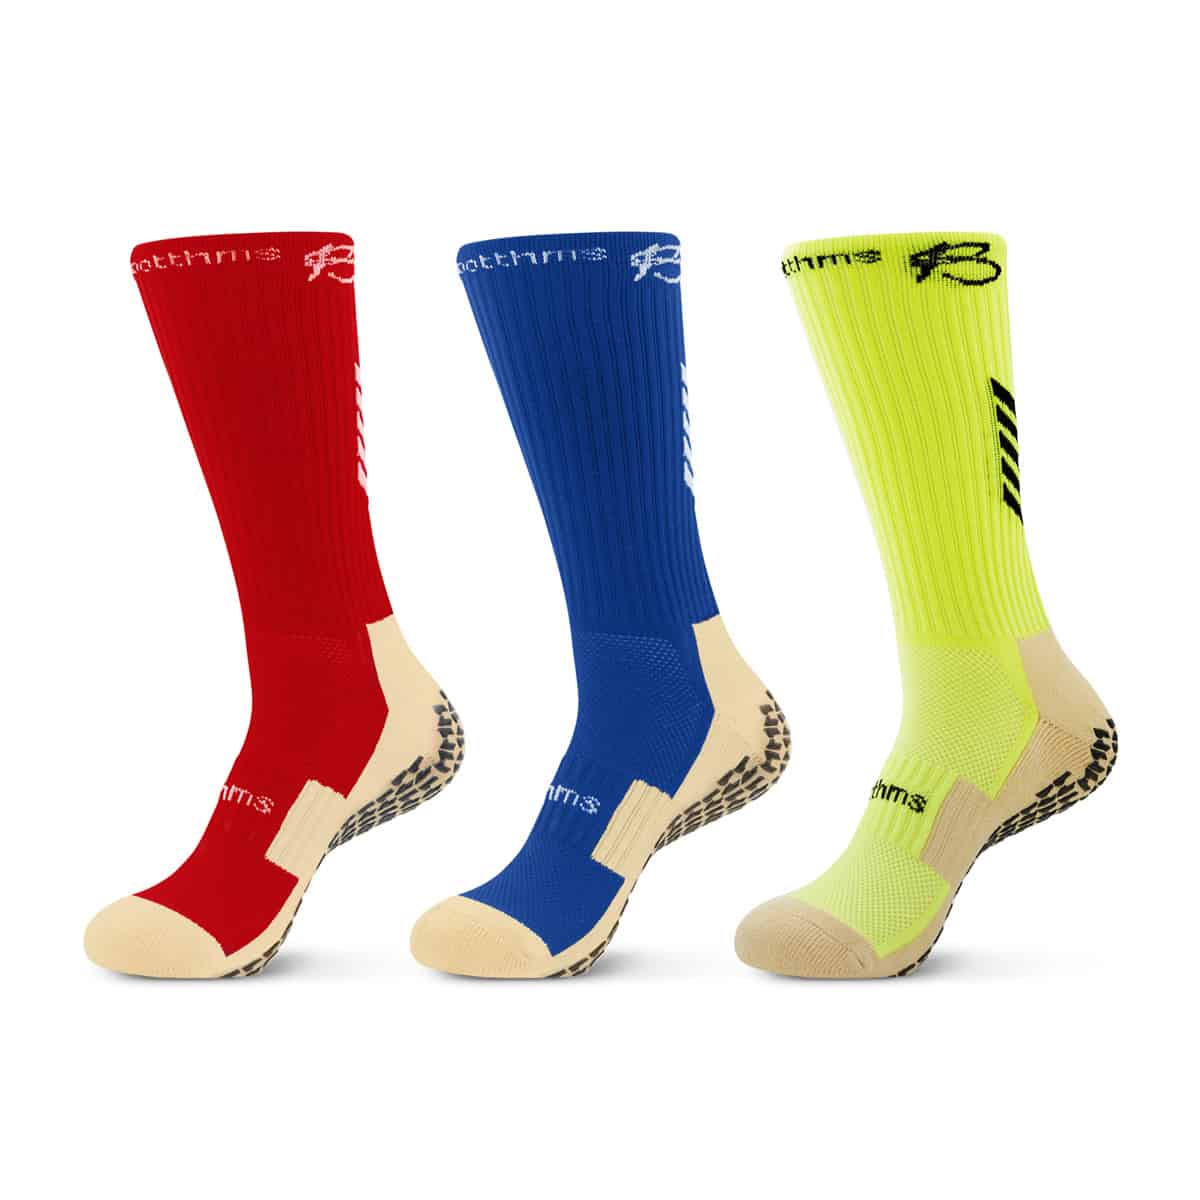 botthms Grip Socks Combo Pack | The Rugby Shop